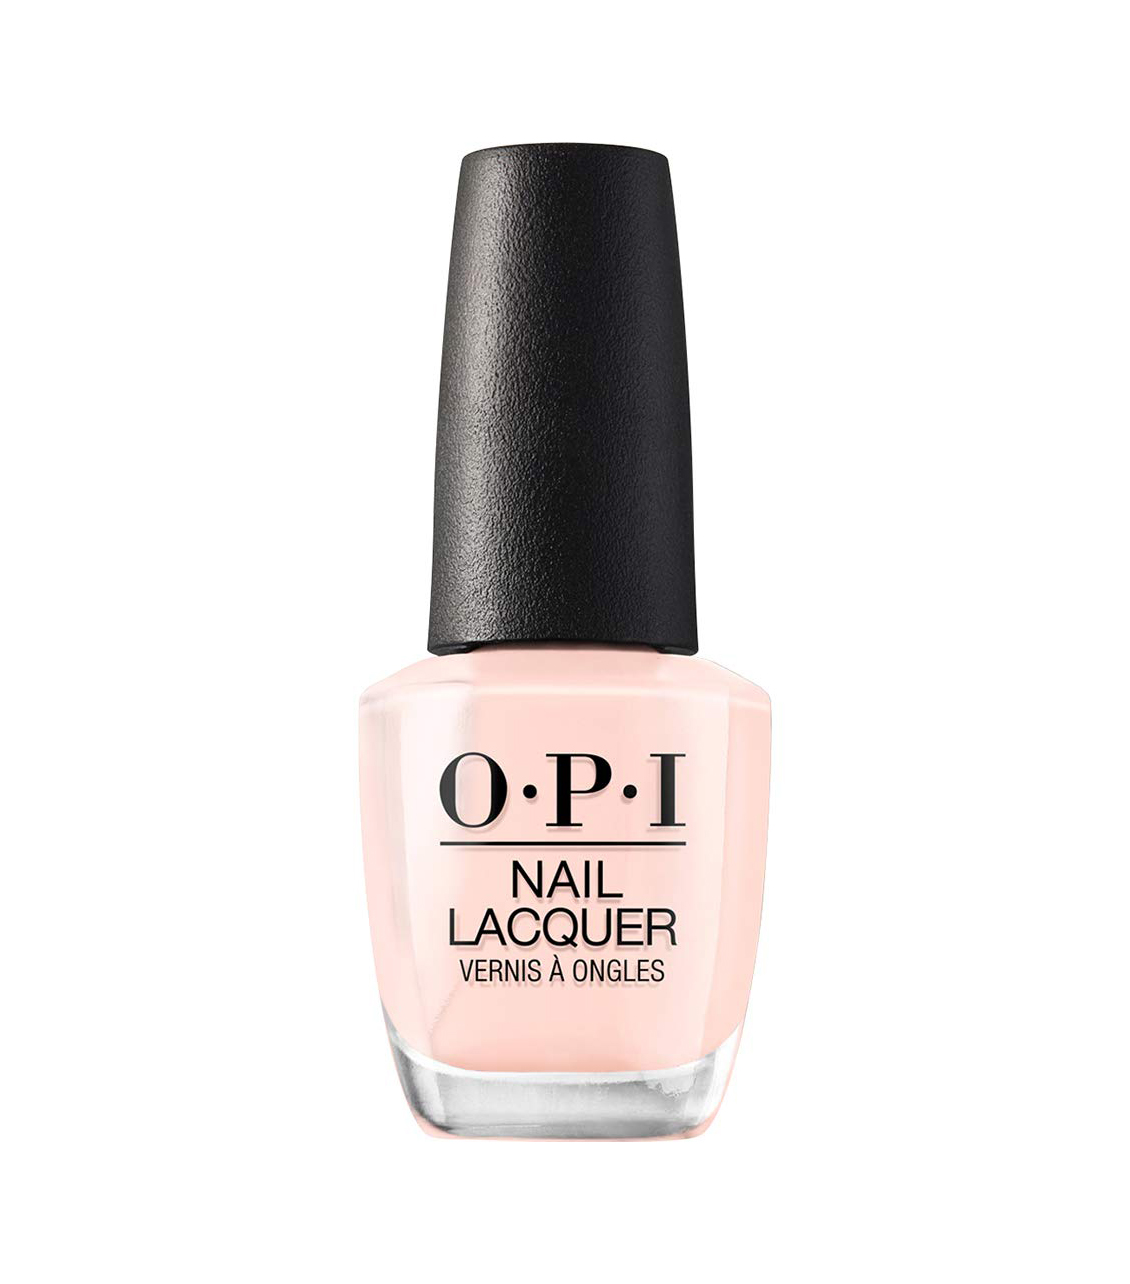 15 Best Sheer Nail Polishes That Are Totally Timeless